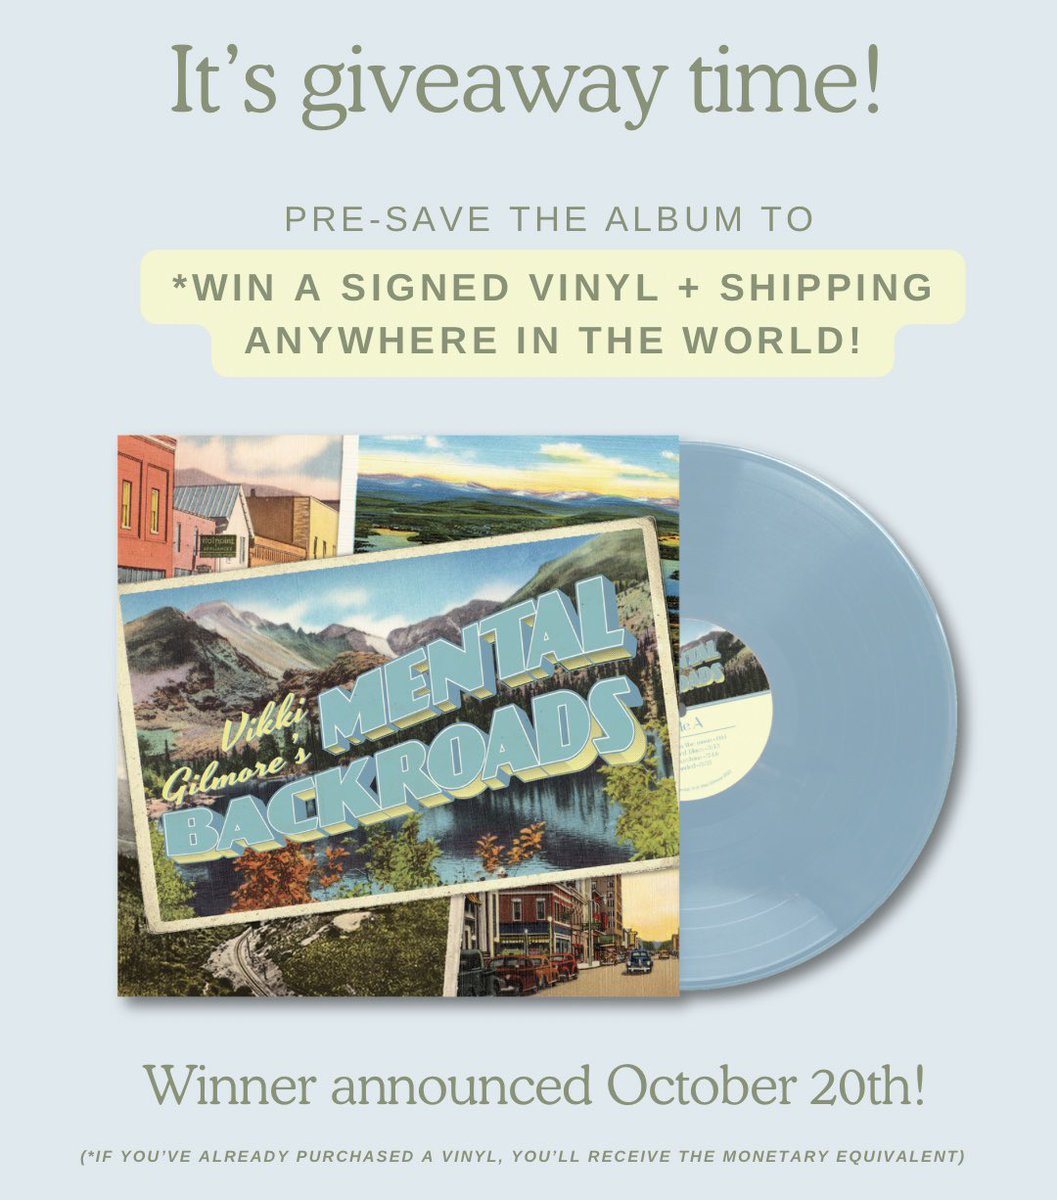 My debut album is out on Friday! If you want to win a limited edition vinyl, pre-save it here: tunelink.to/mentalbackroads